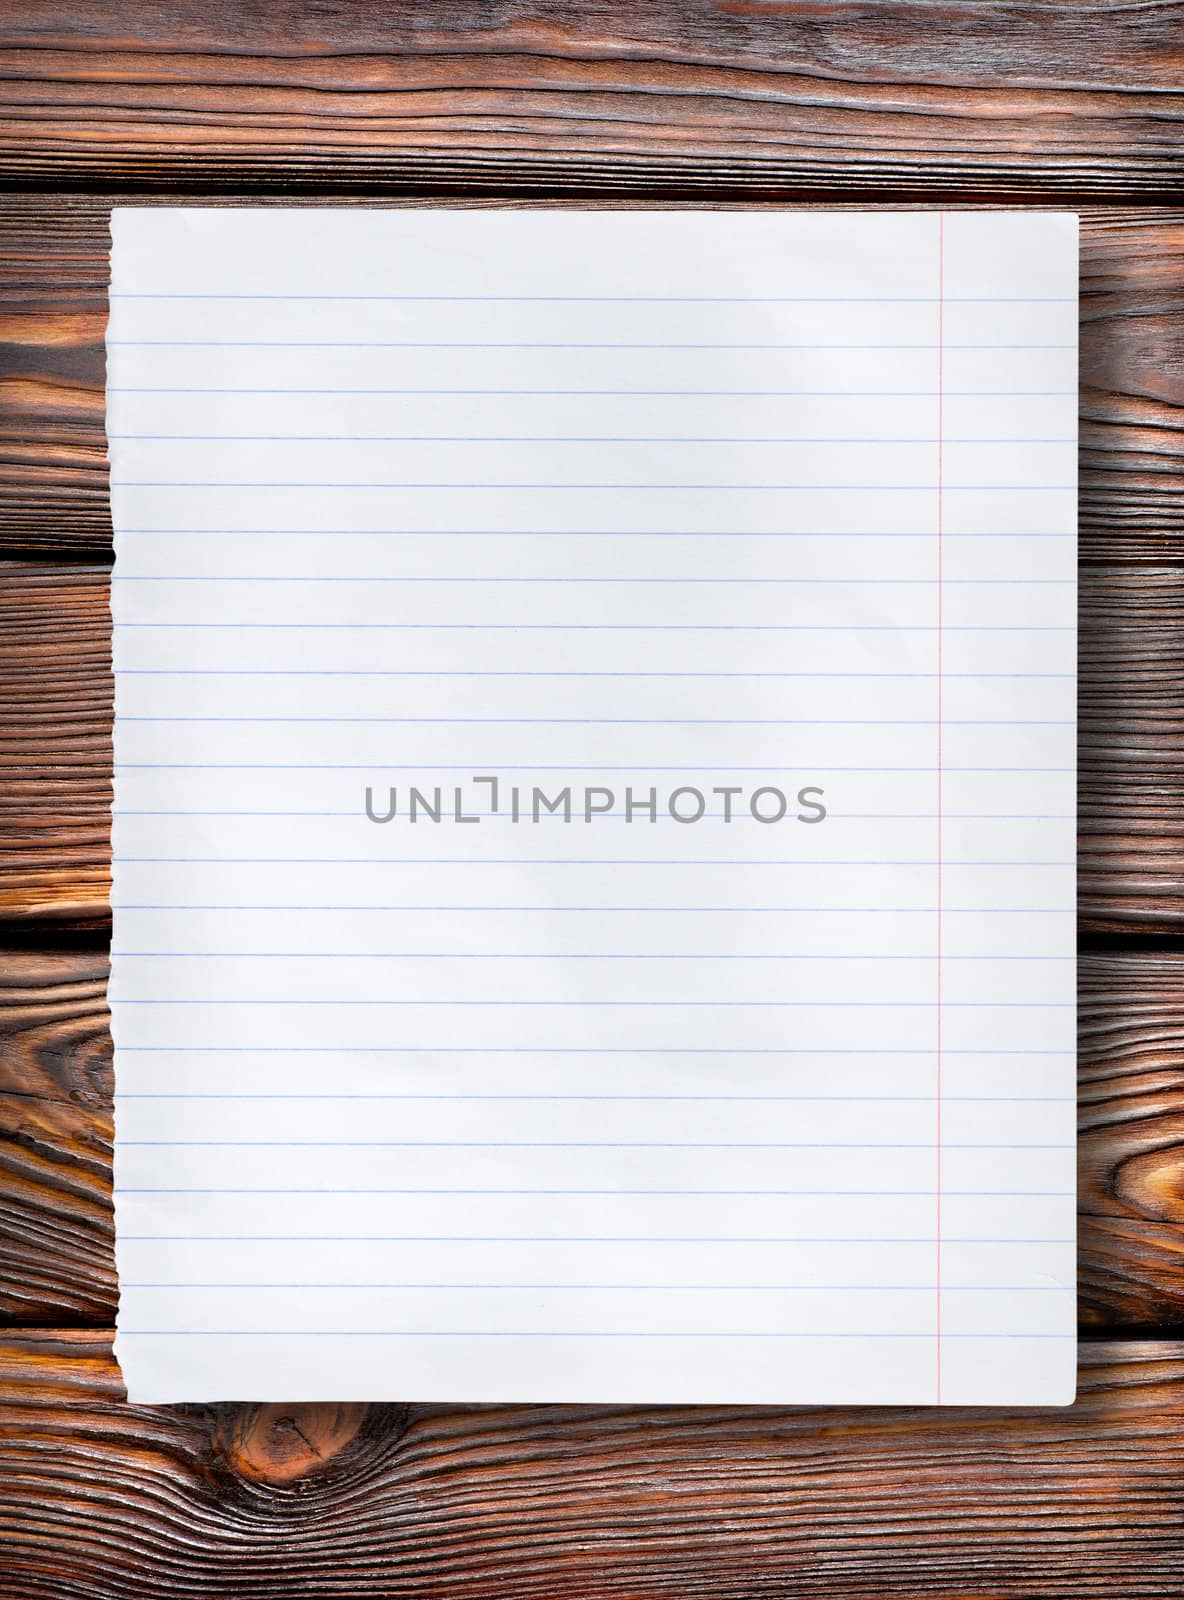 Lined paper on a dark wooden table